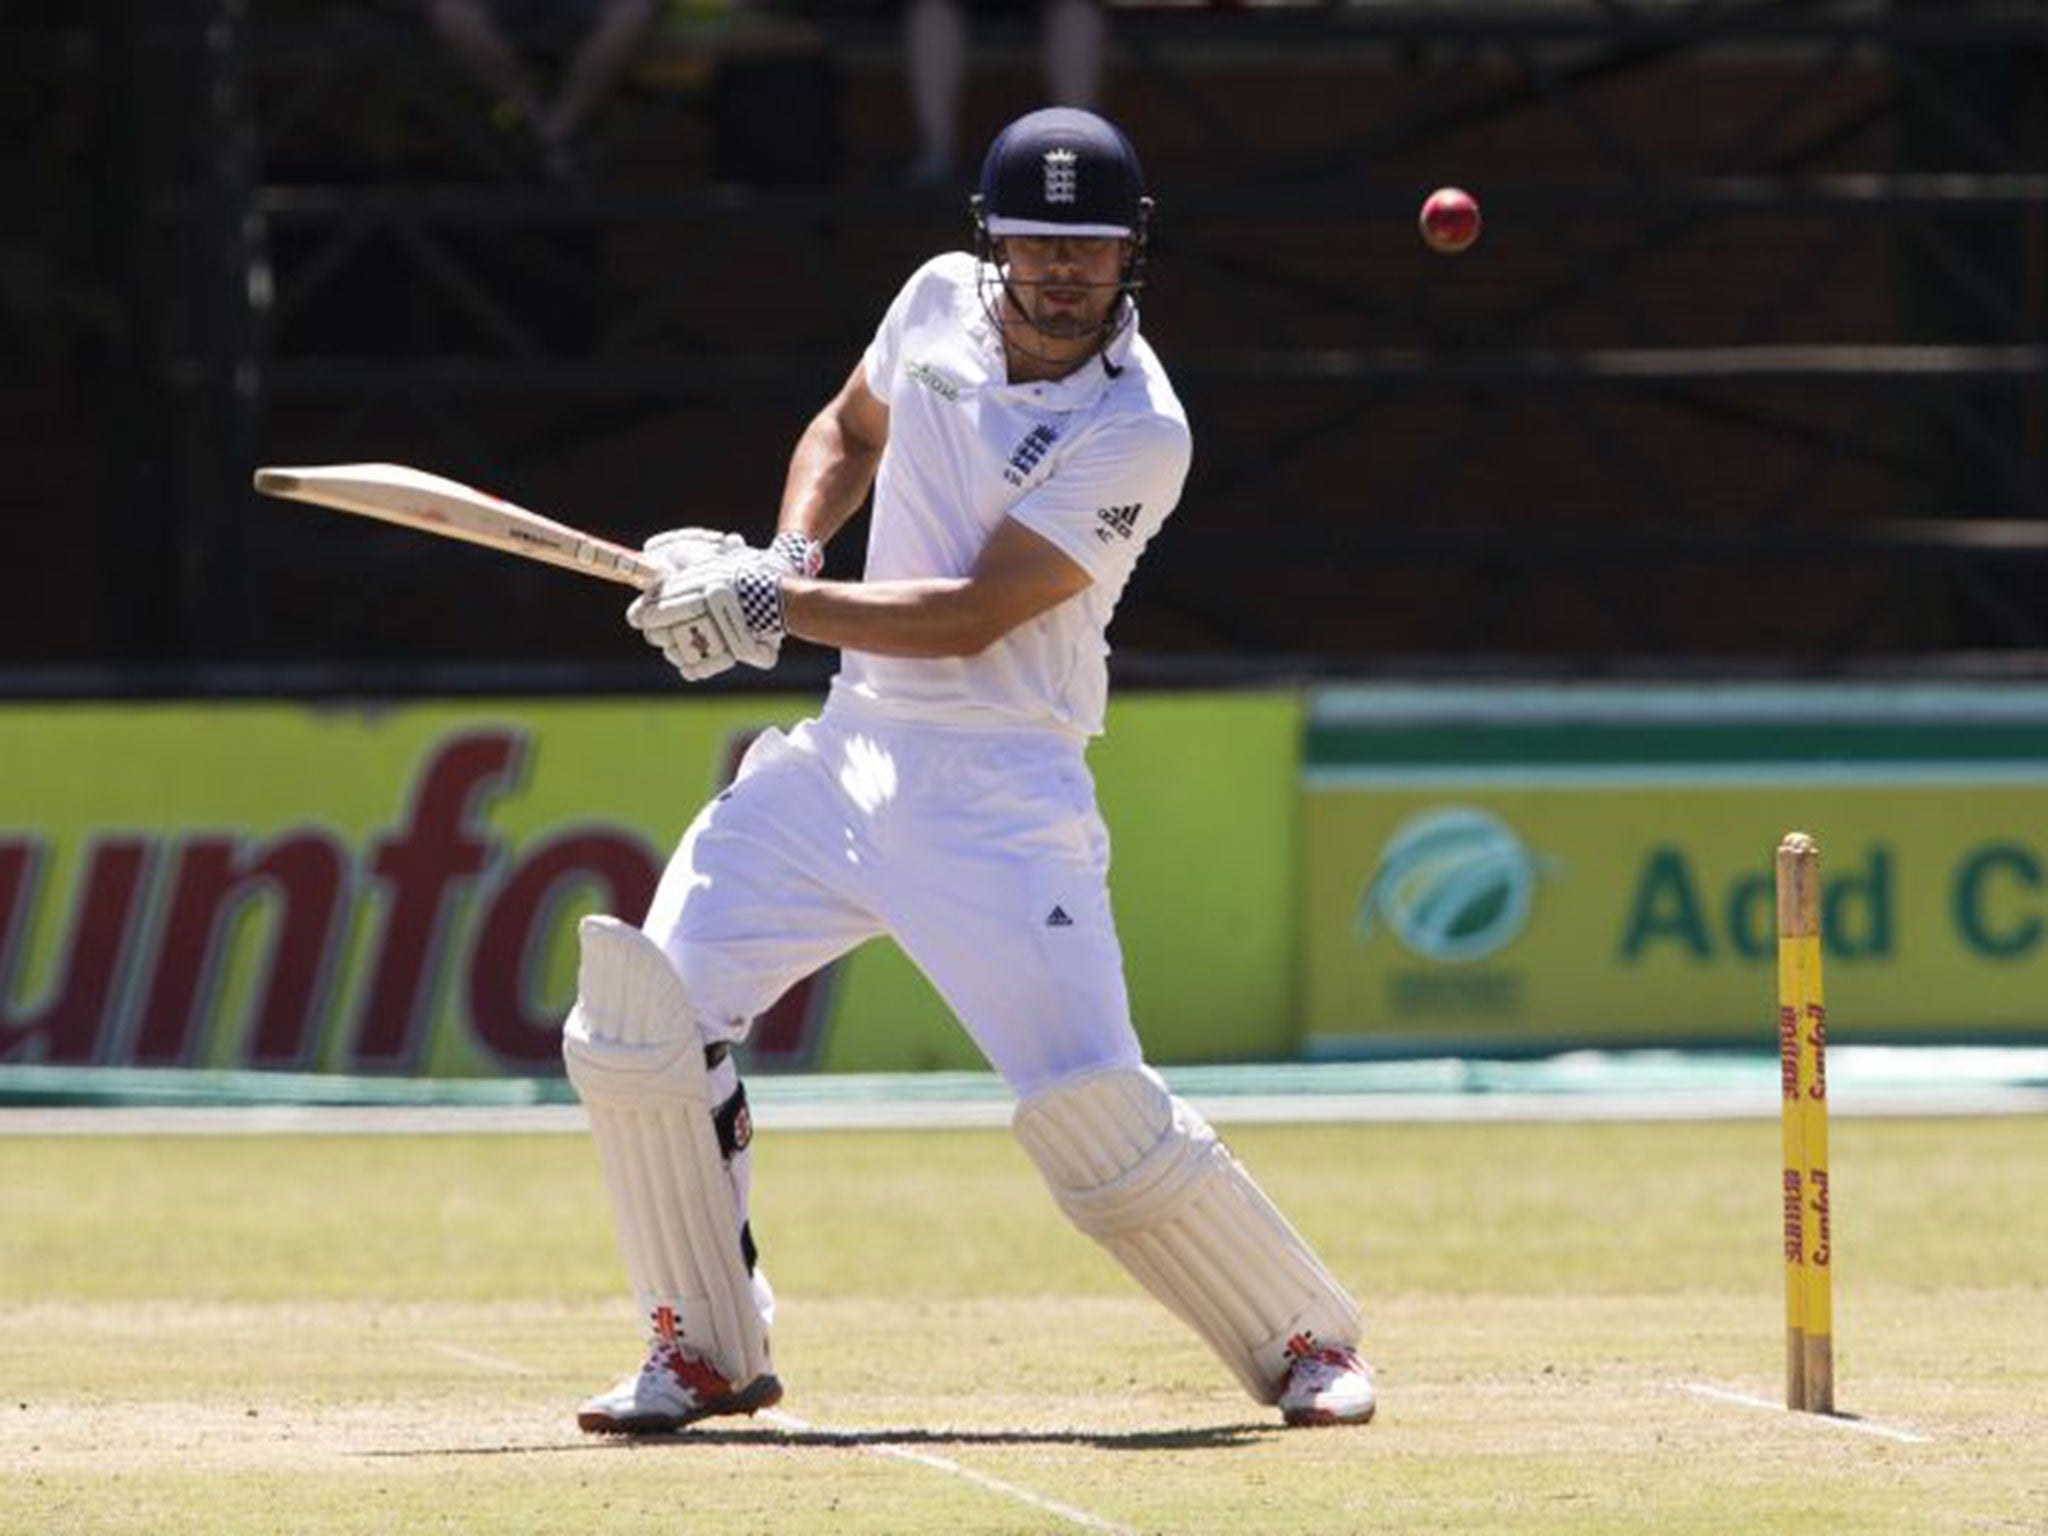 Alastair Cook plays a shot on his way to 126 against South Africa A